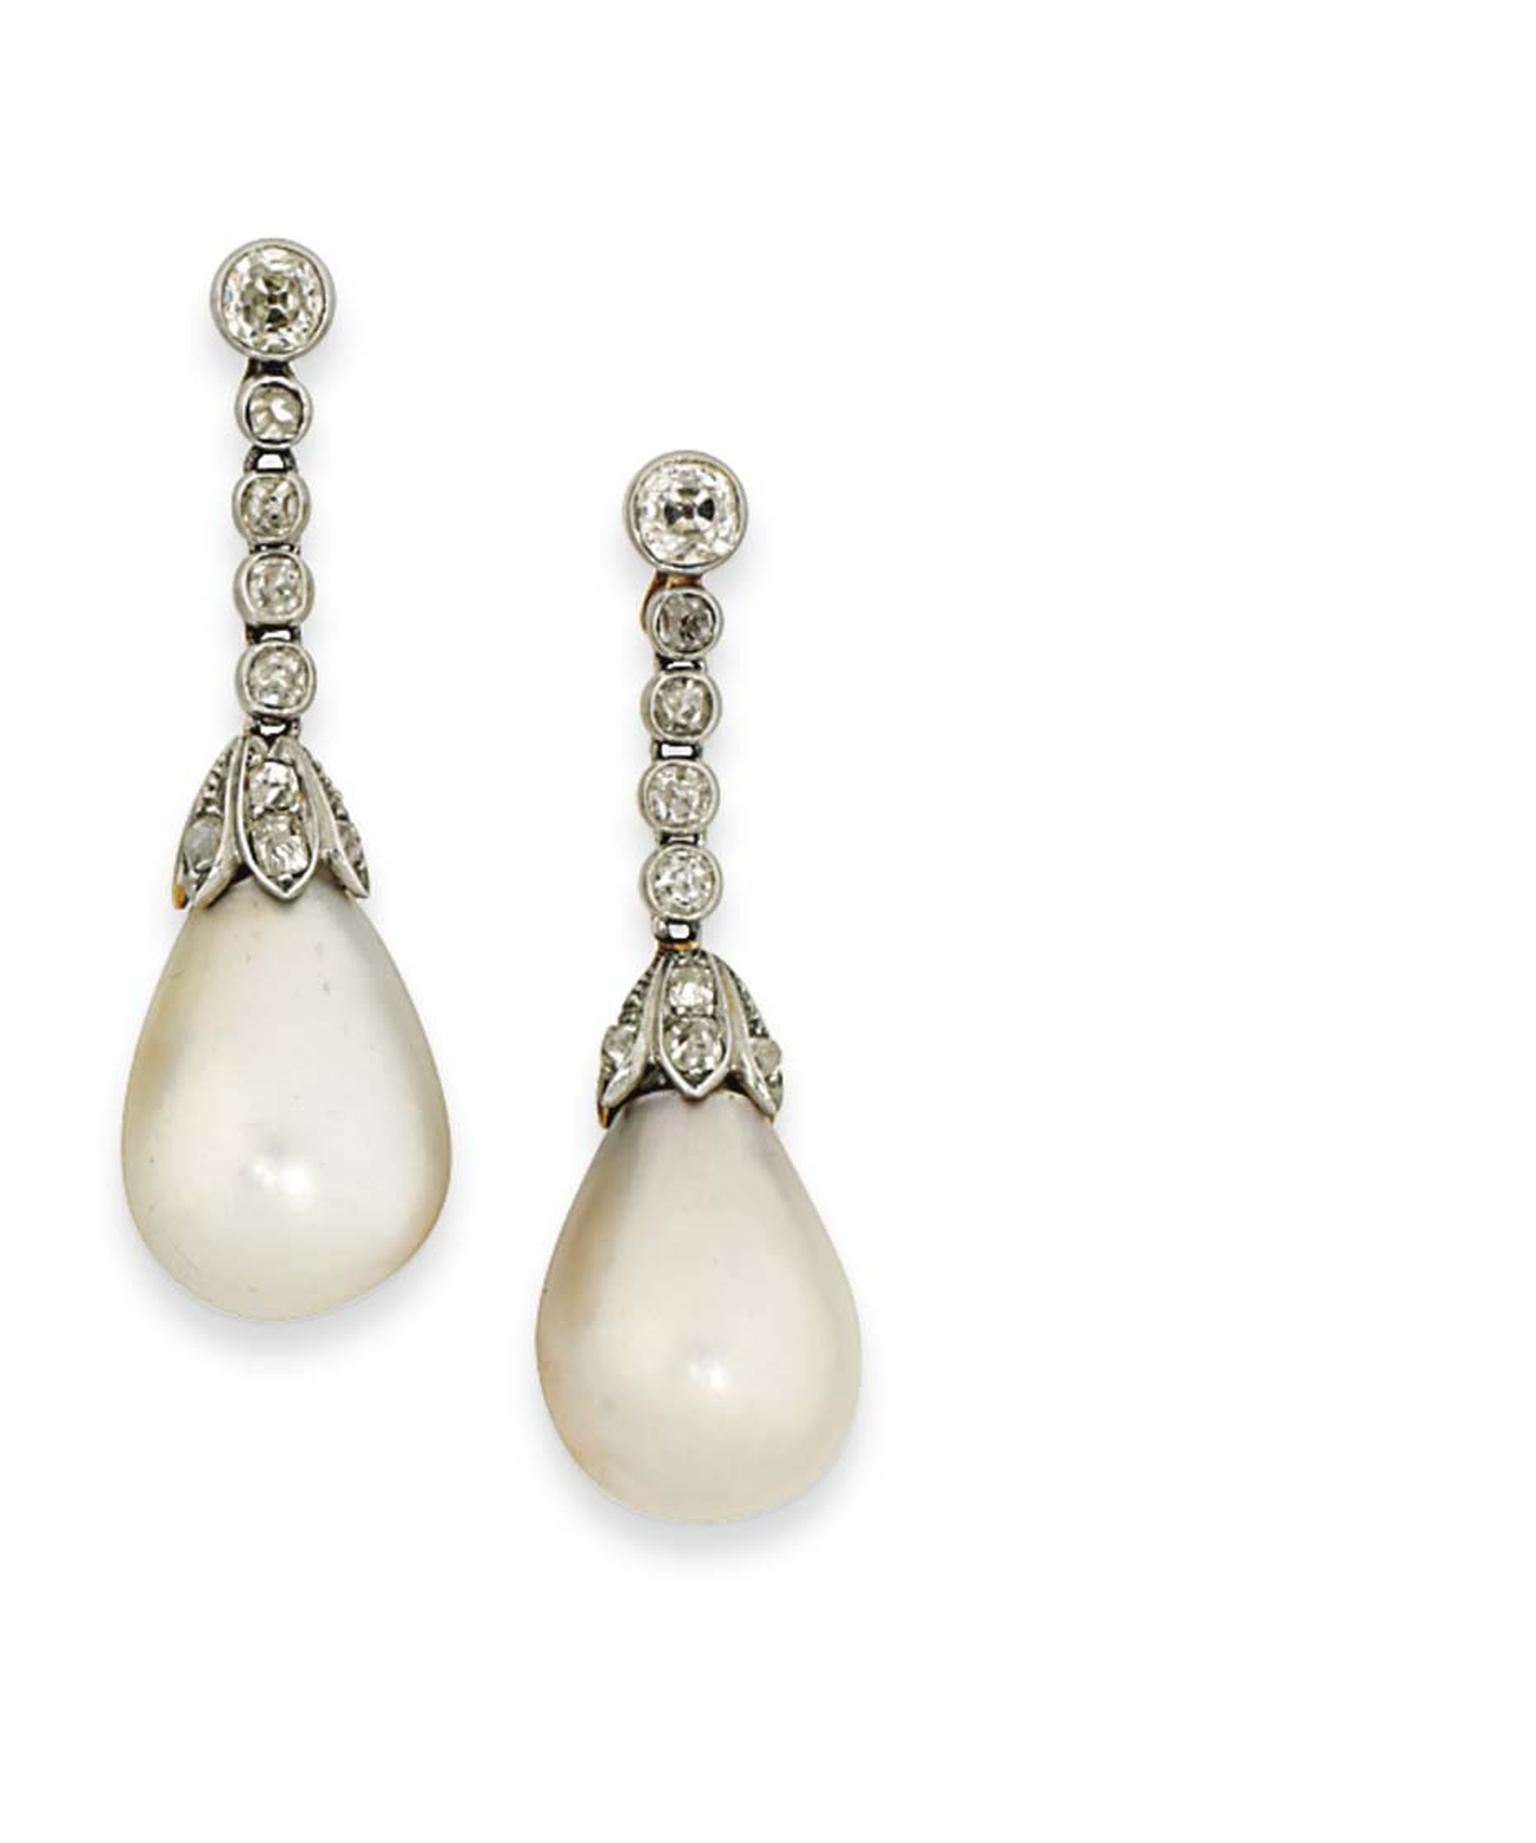 These elegant late 19th century natural pearl ear pendants more than doubled their high pre-sale estimate to sell for £104,500 at Christie's London in 2014.